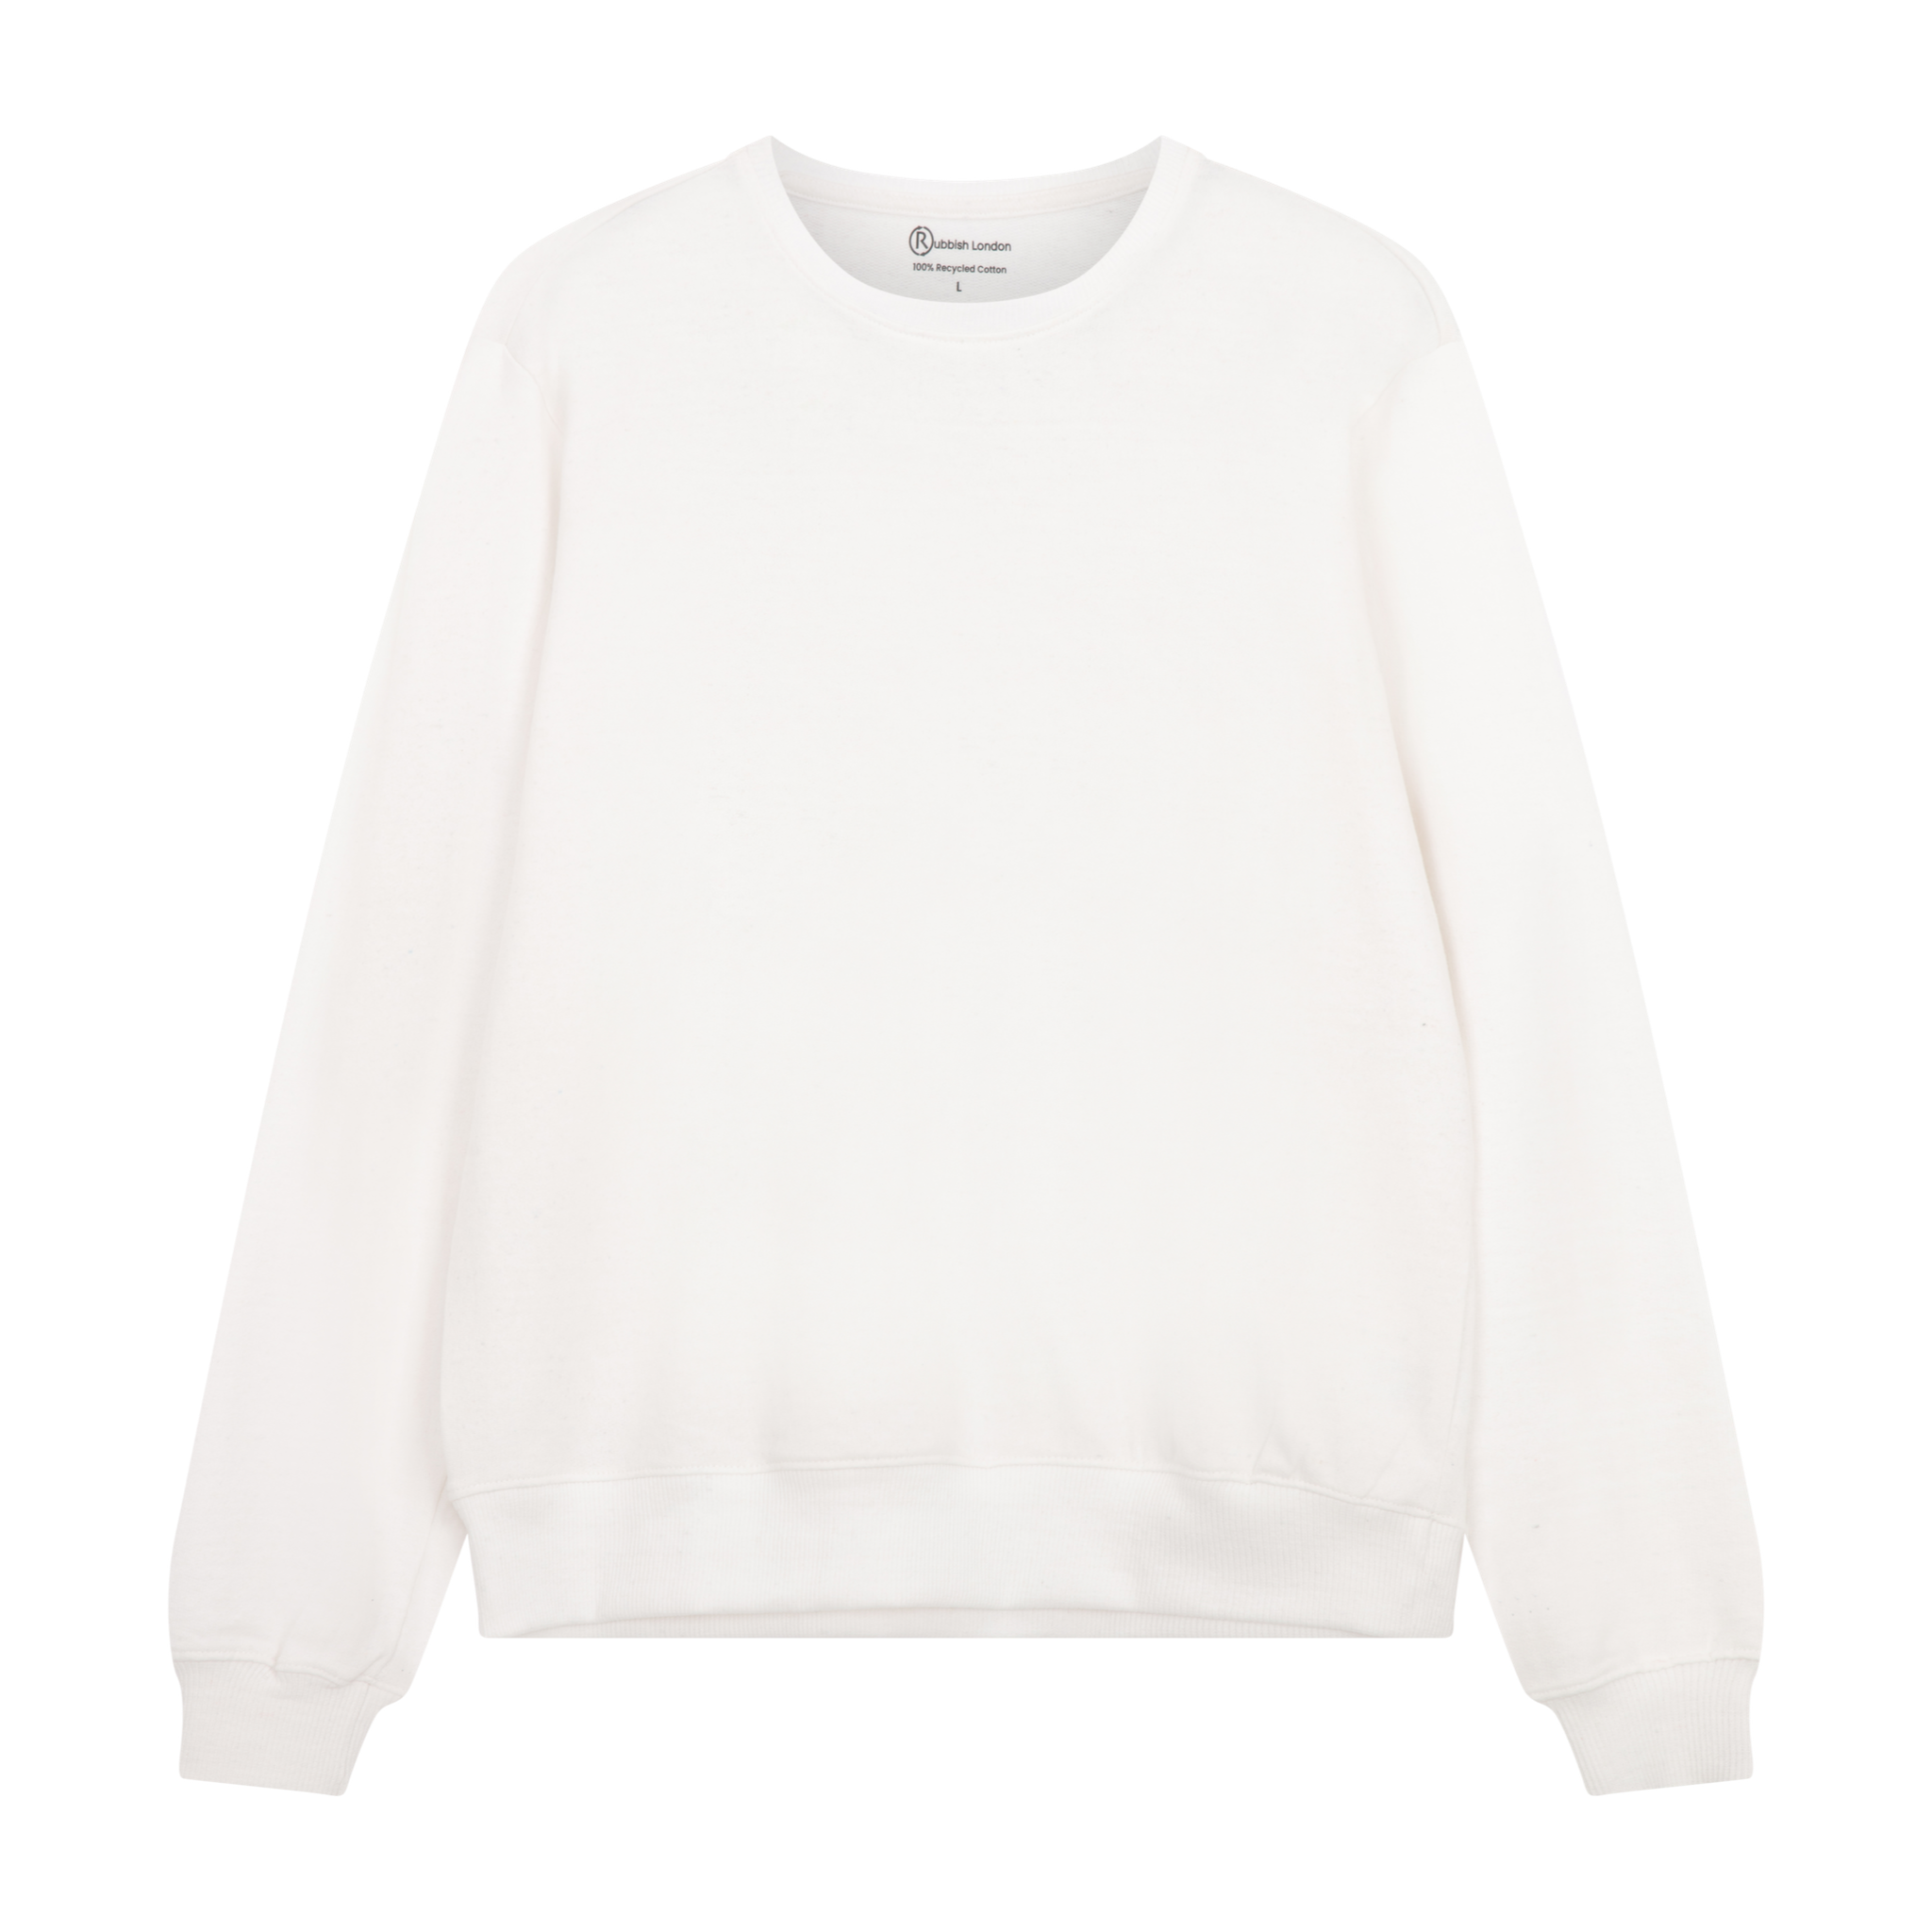 100% Recycled Cotton Fitted Sweatshirt